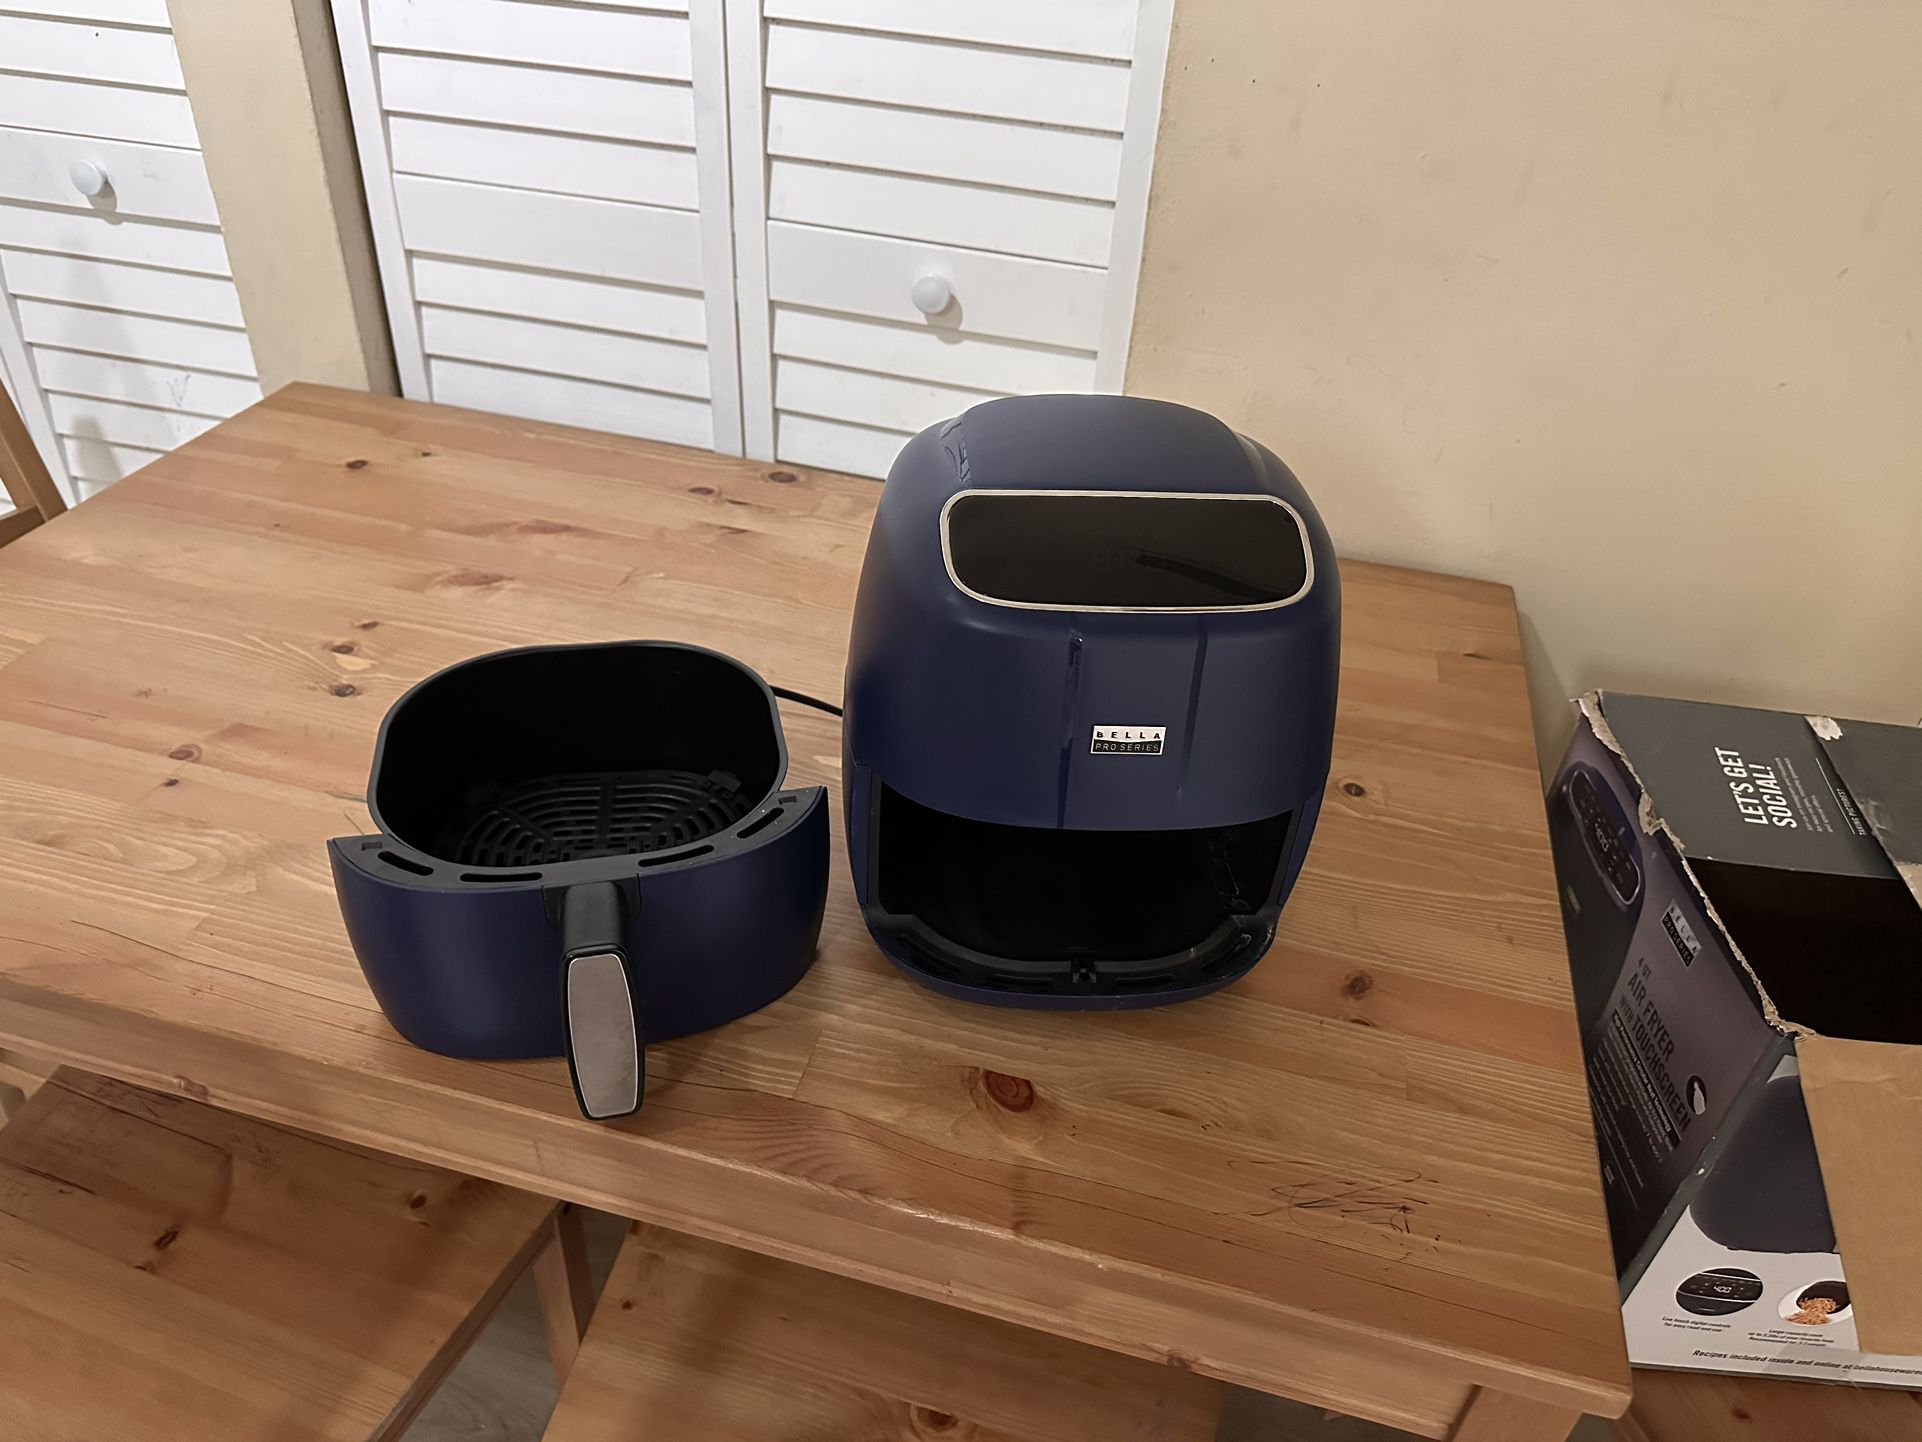 2 Quart Air Fryer By Bella for Sale in Fort Lauderdale, FL - OfferUp